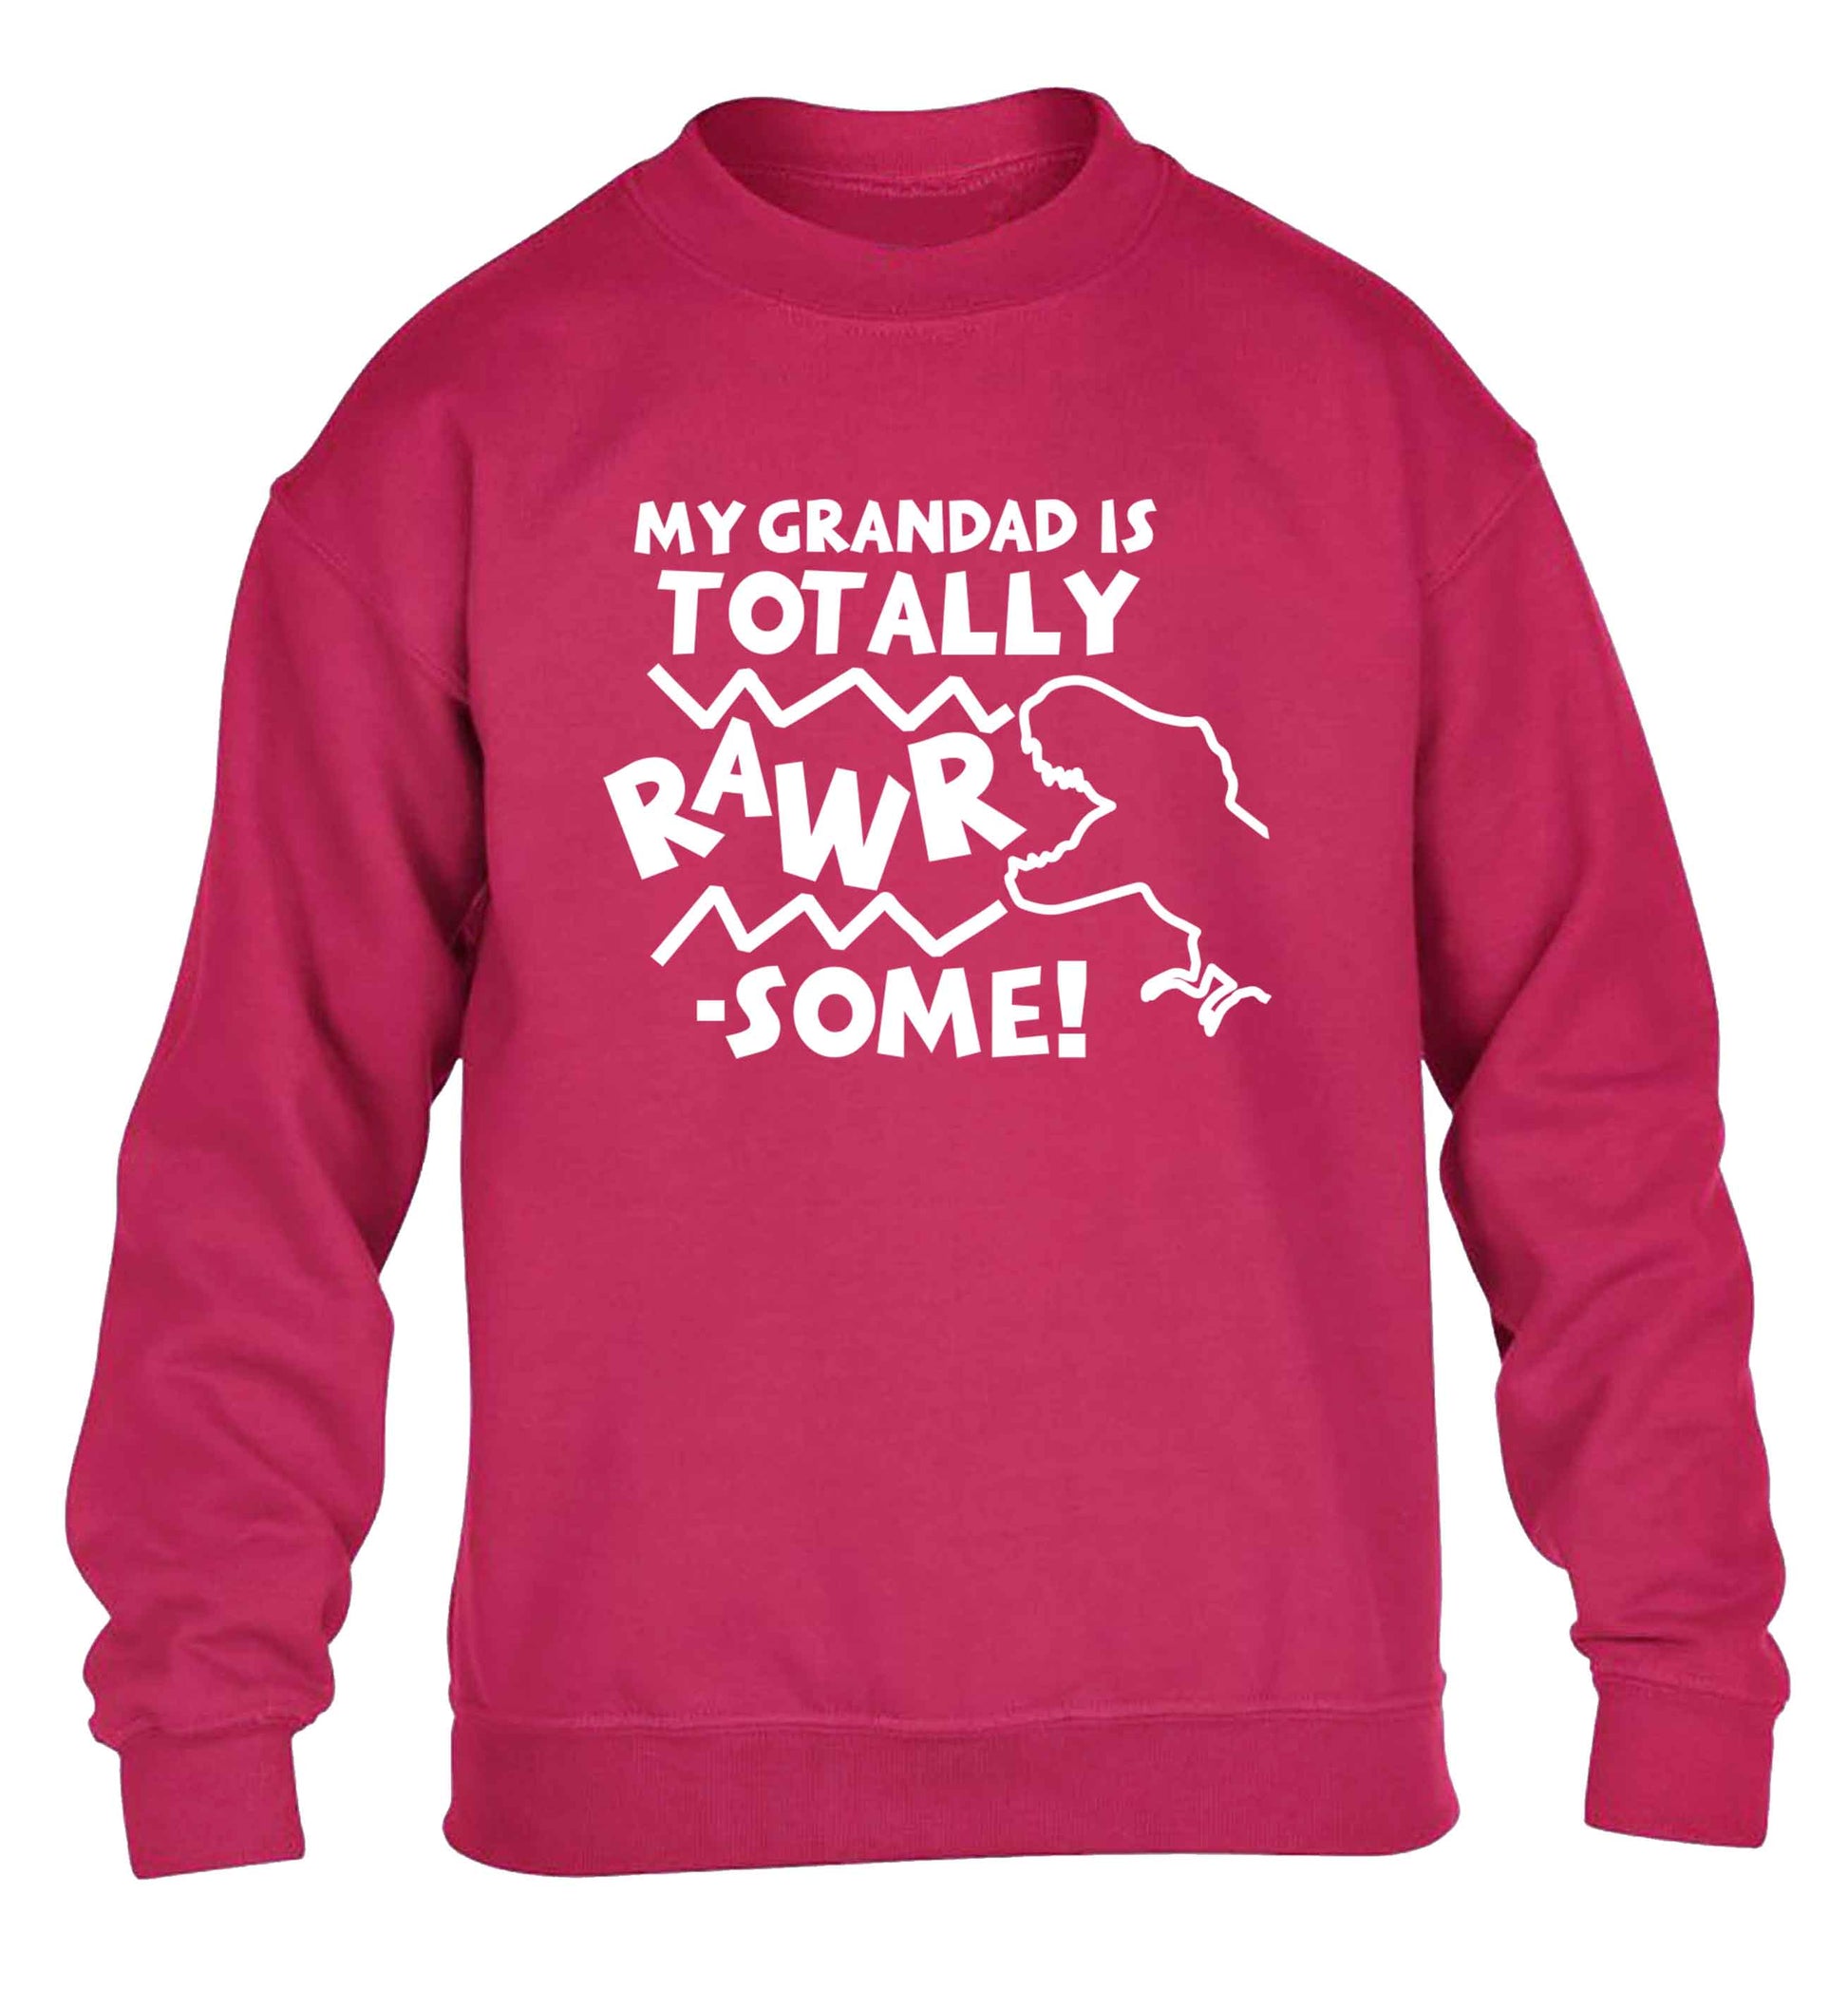 My grandad is totally rawrsome children's pink sweater 12-13 Years